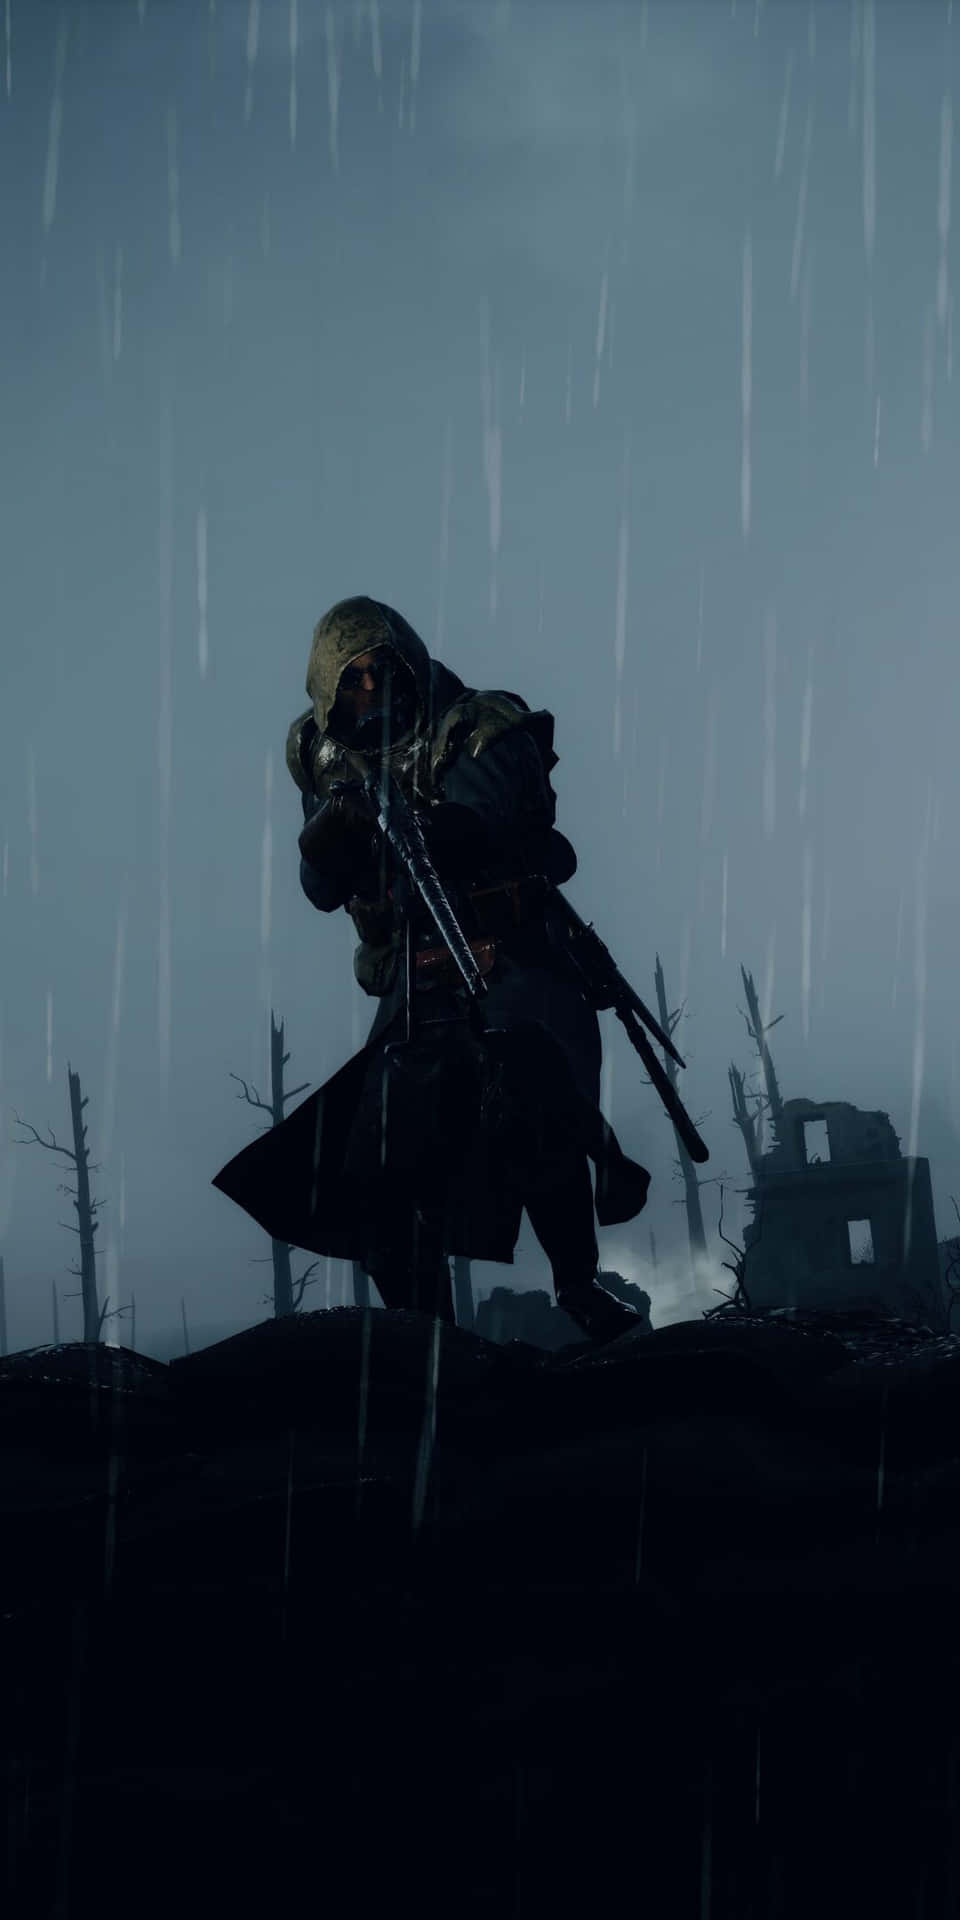 A Man Is Standing In The Rain With A Rifle